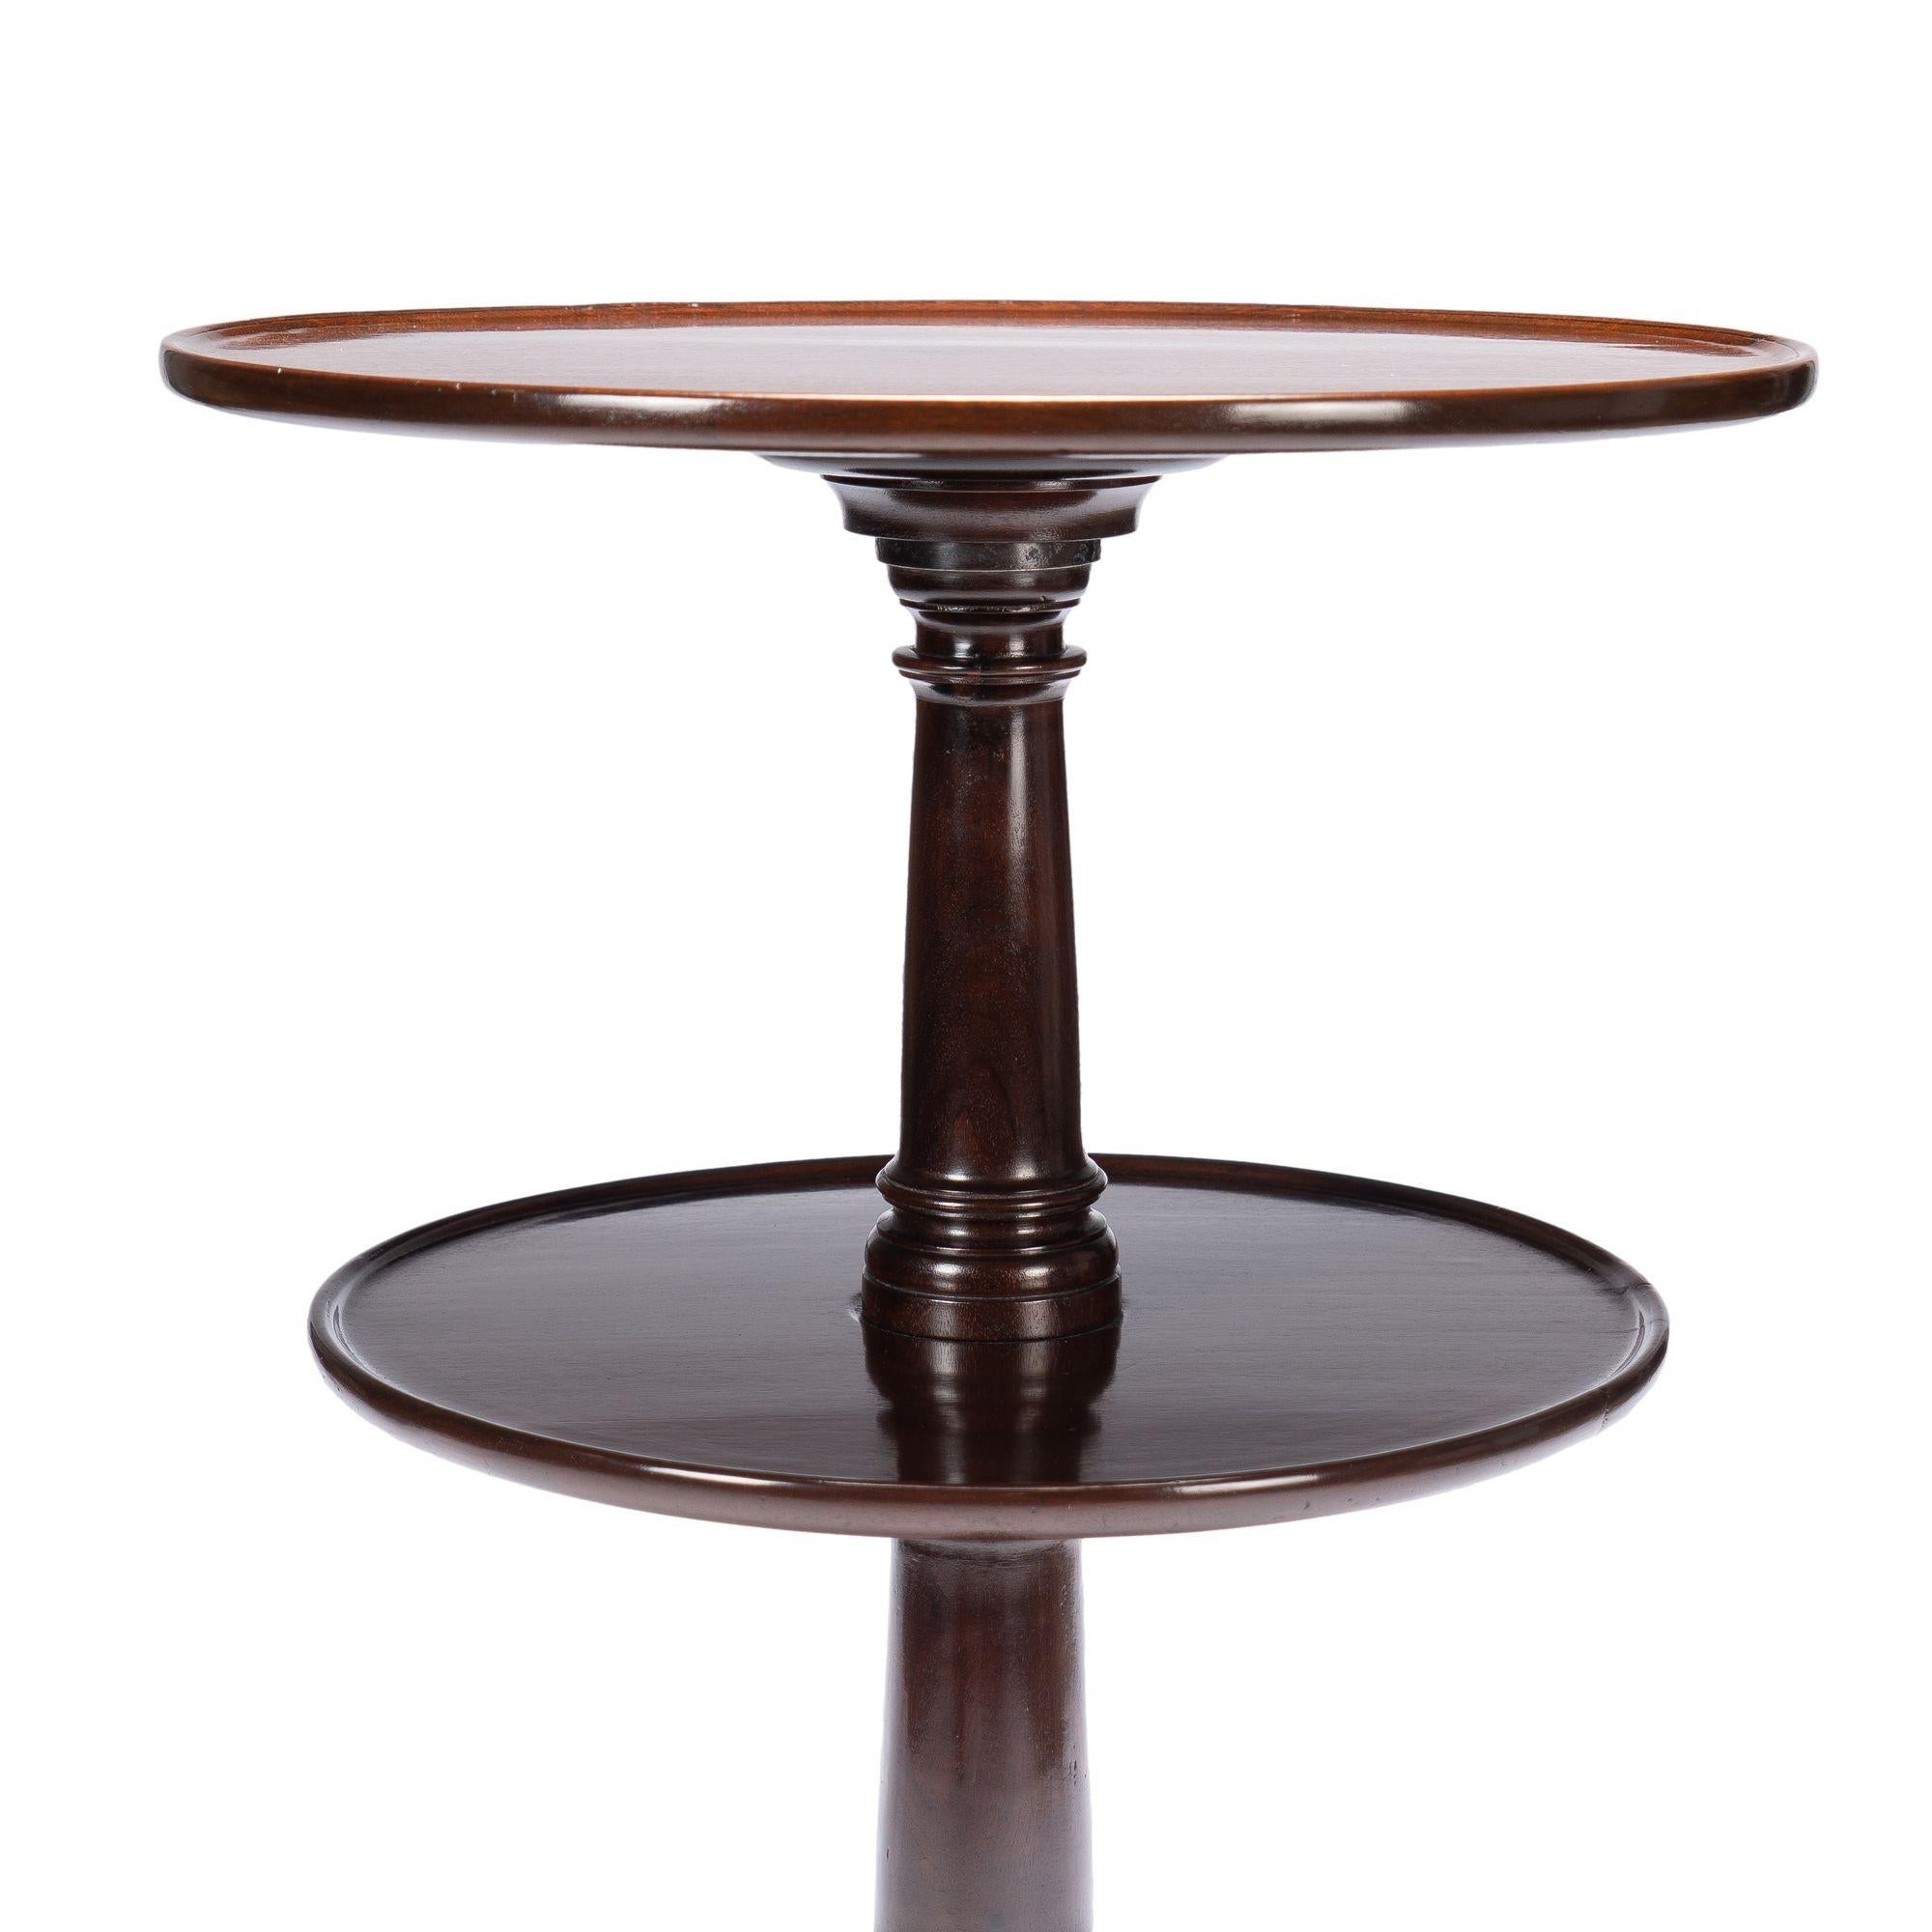 A rare form of Georgian two tier circular dumbwaiter in Cuban mahogany. The design features reverse graduated revolving dish tops with a turned columnar pedestal on tripod cabriole legs with slipper feet. The dumbwaiter can be partially disassembled